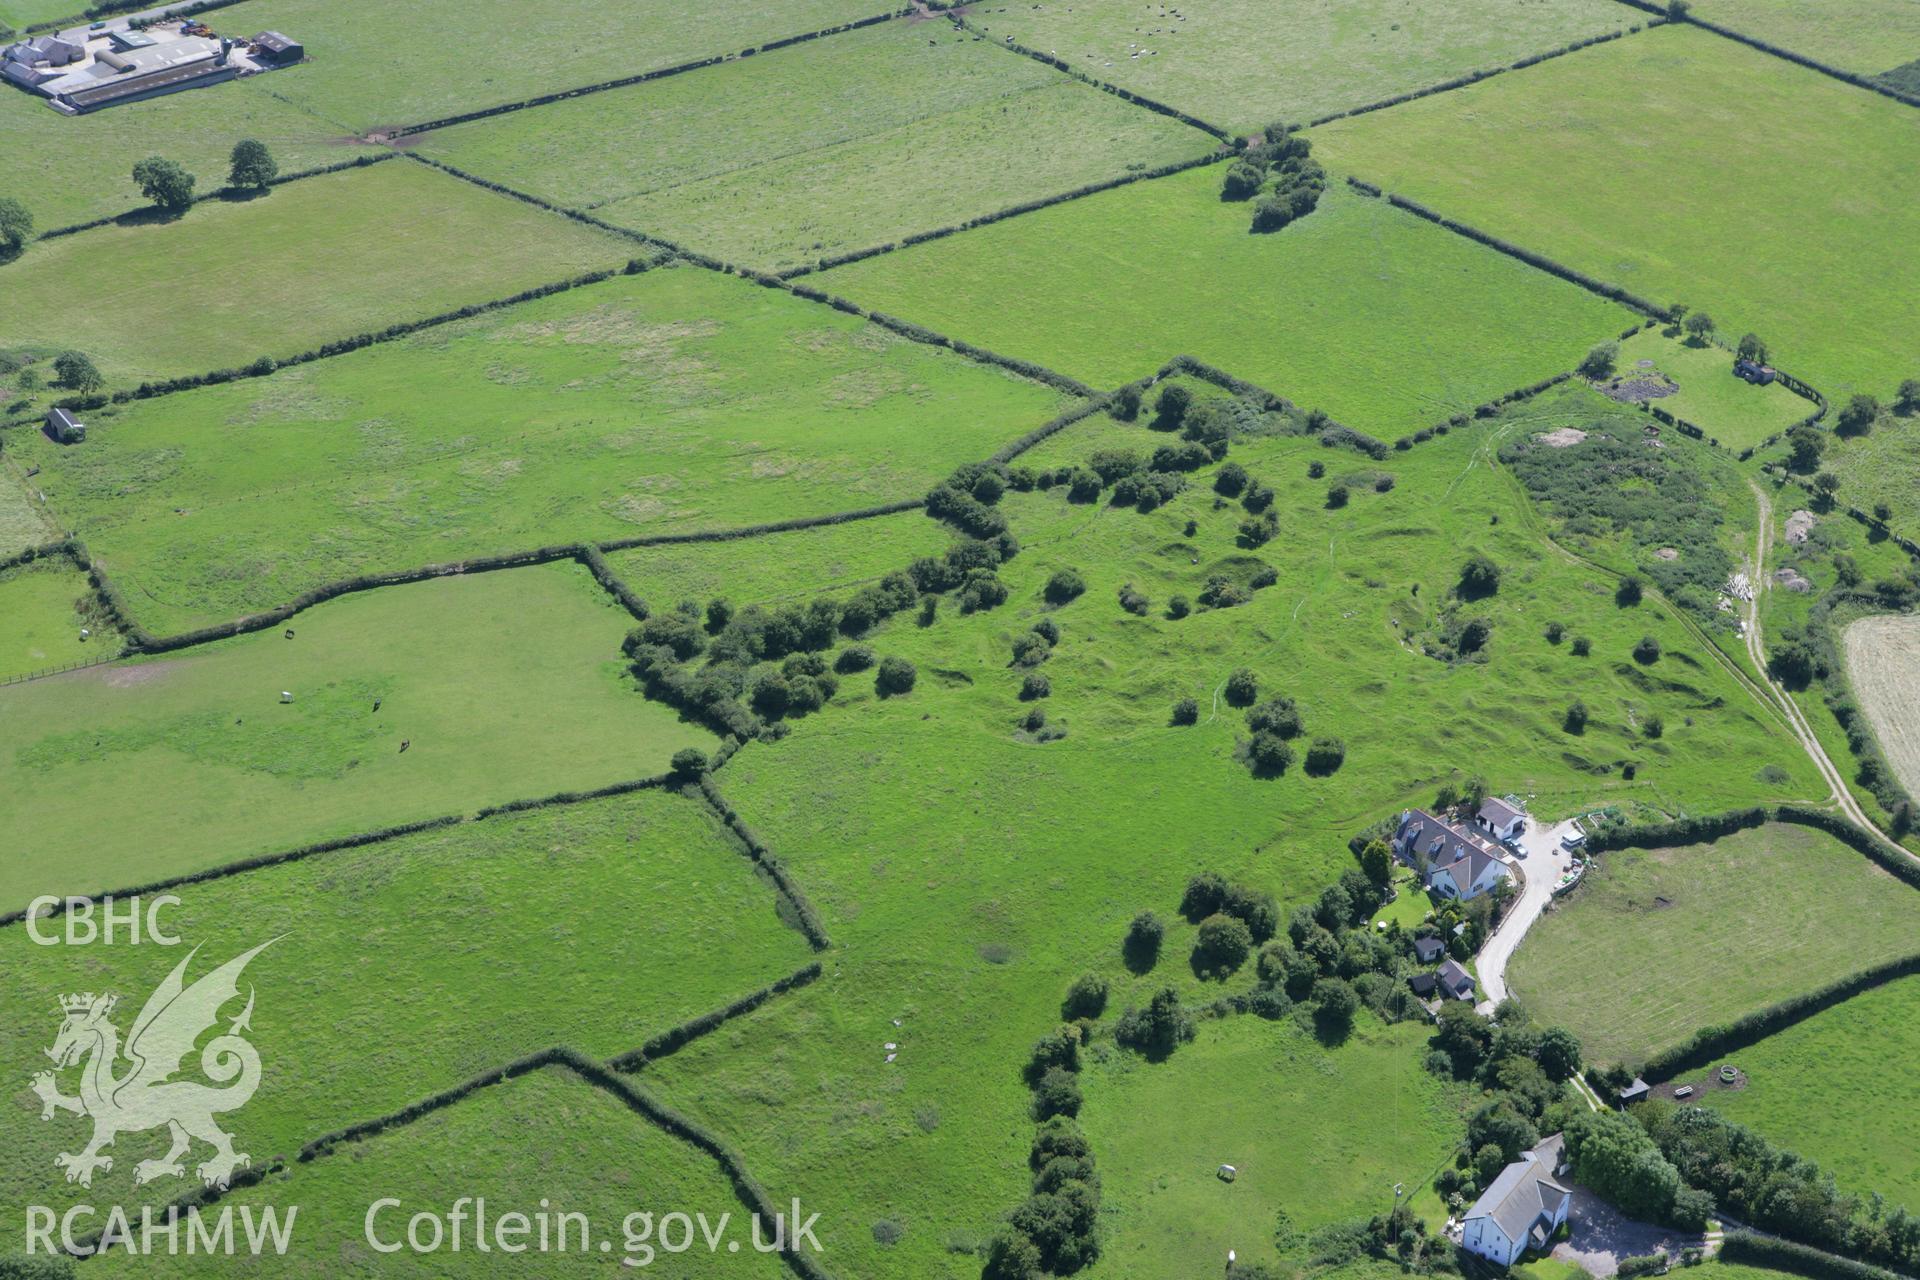 RCAHMW colour oblique aerial photograph of Axton, Tumulus V. Taken on 31 July 2007 by Toby Driver